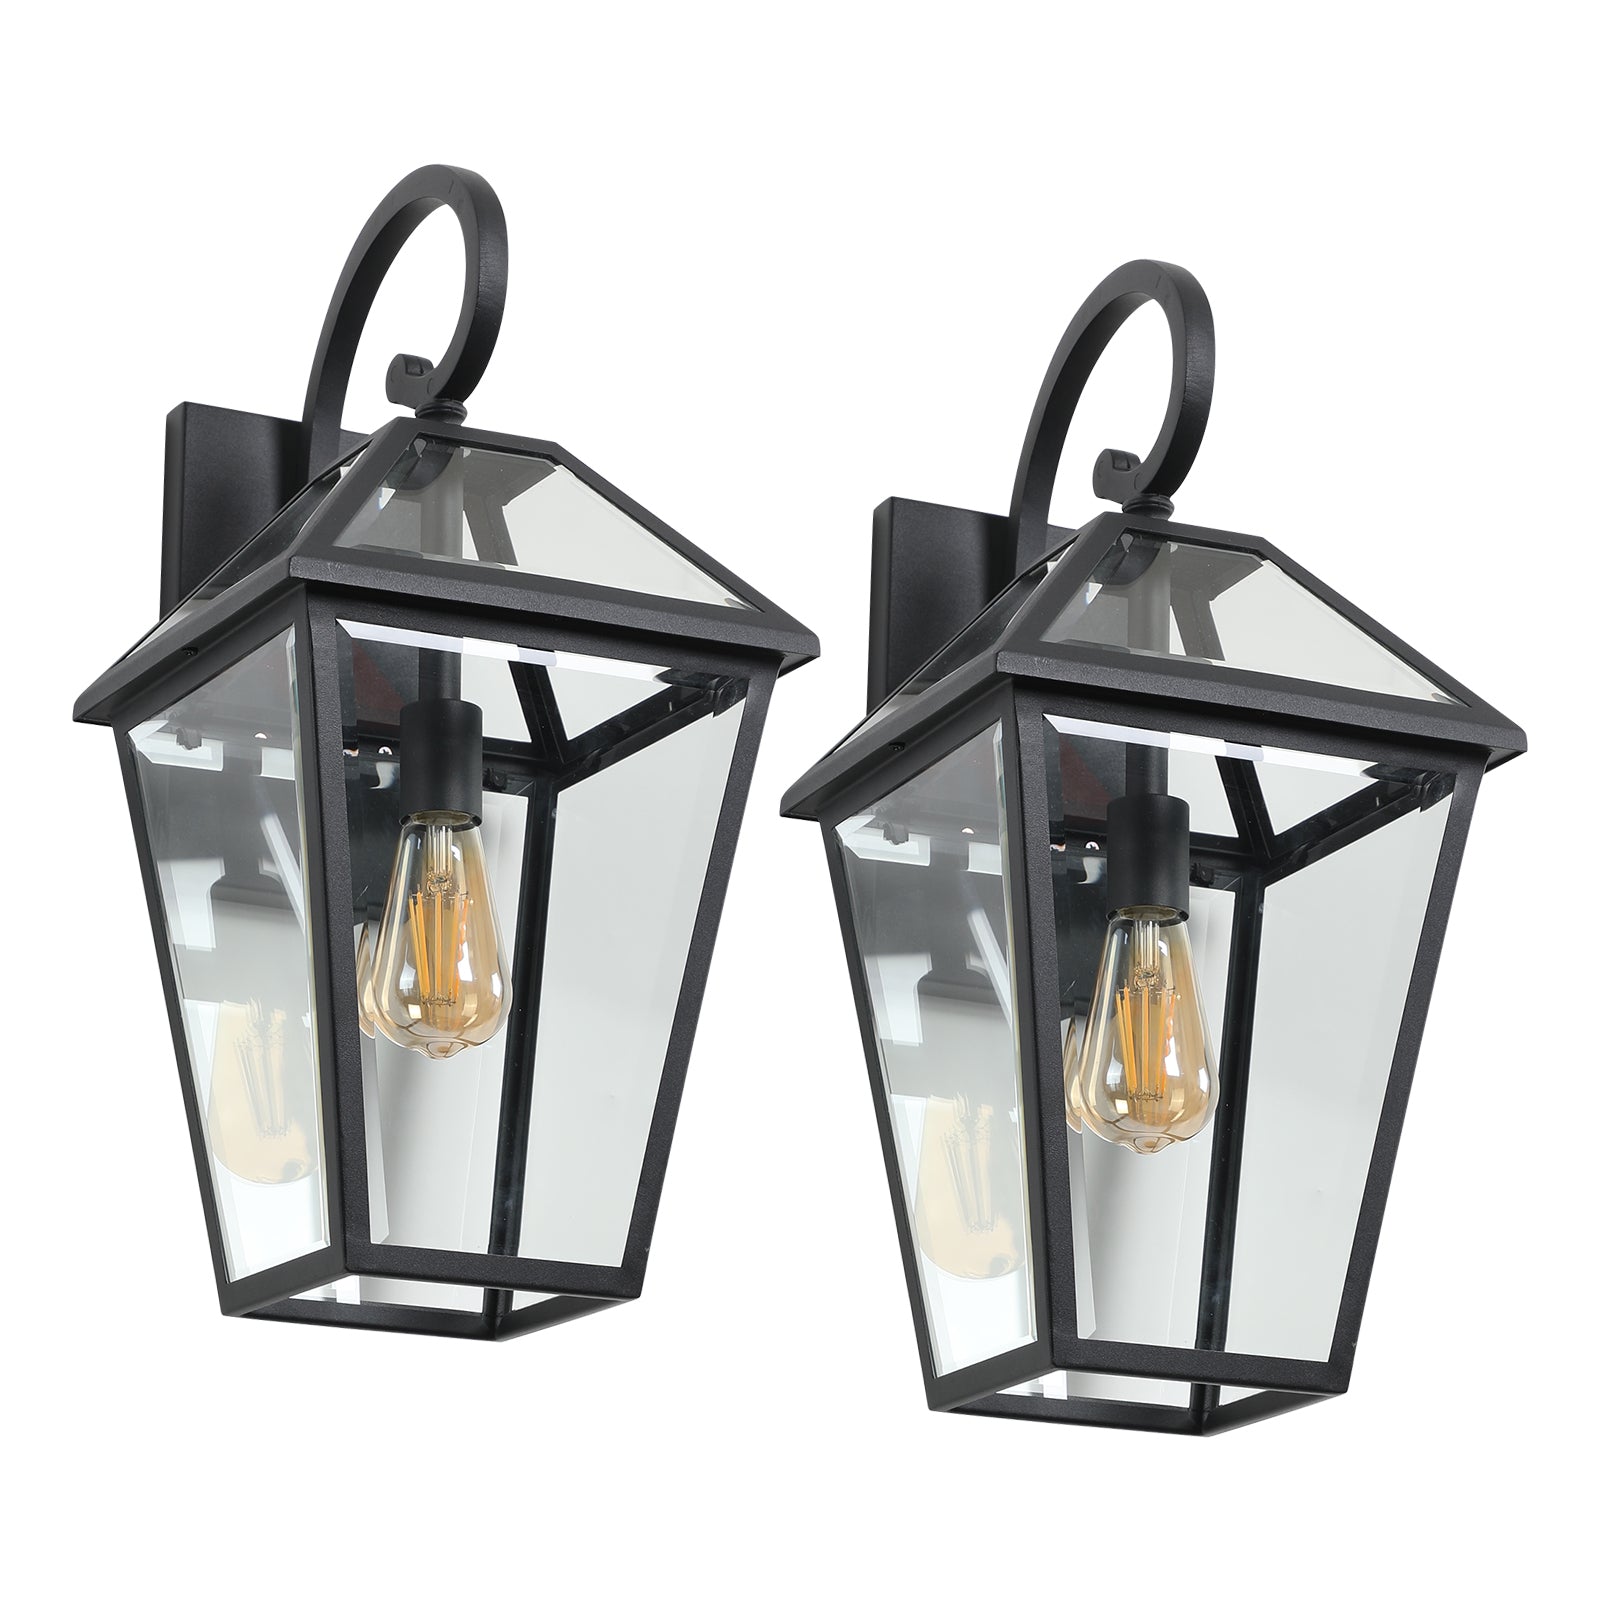 Modern Outdoor Waterproof Wall Lamp 2pack black-traditional-glass